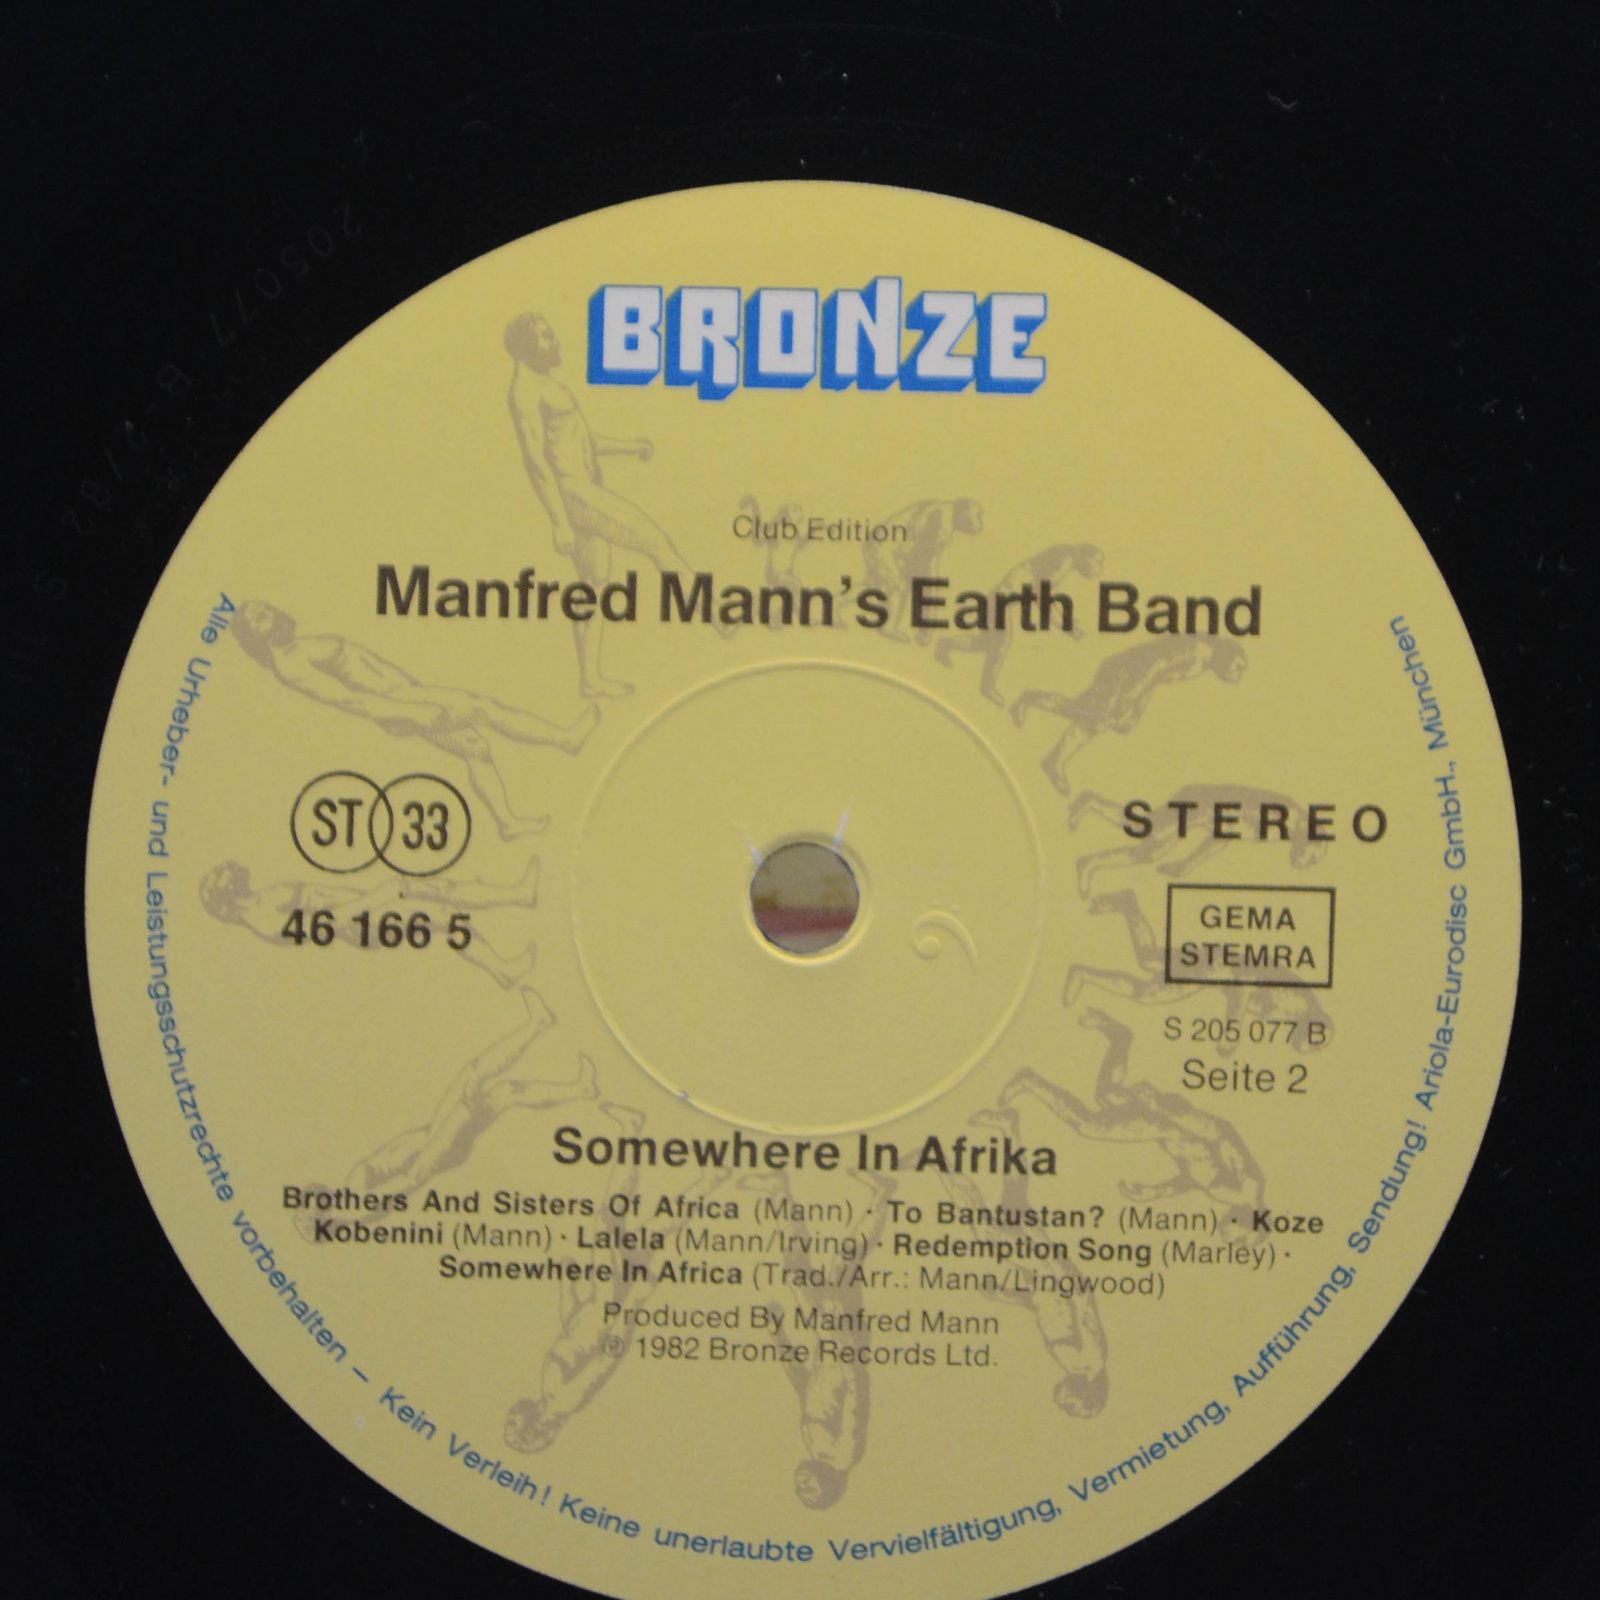 Manfred Mann's Earth Band — Somewhere In Afrika, 1982